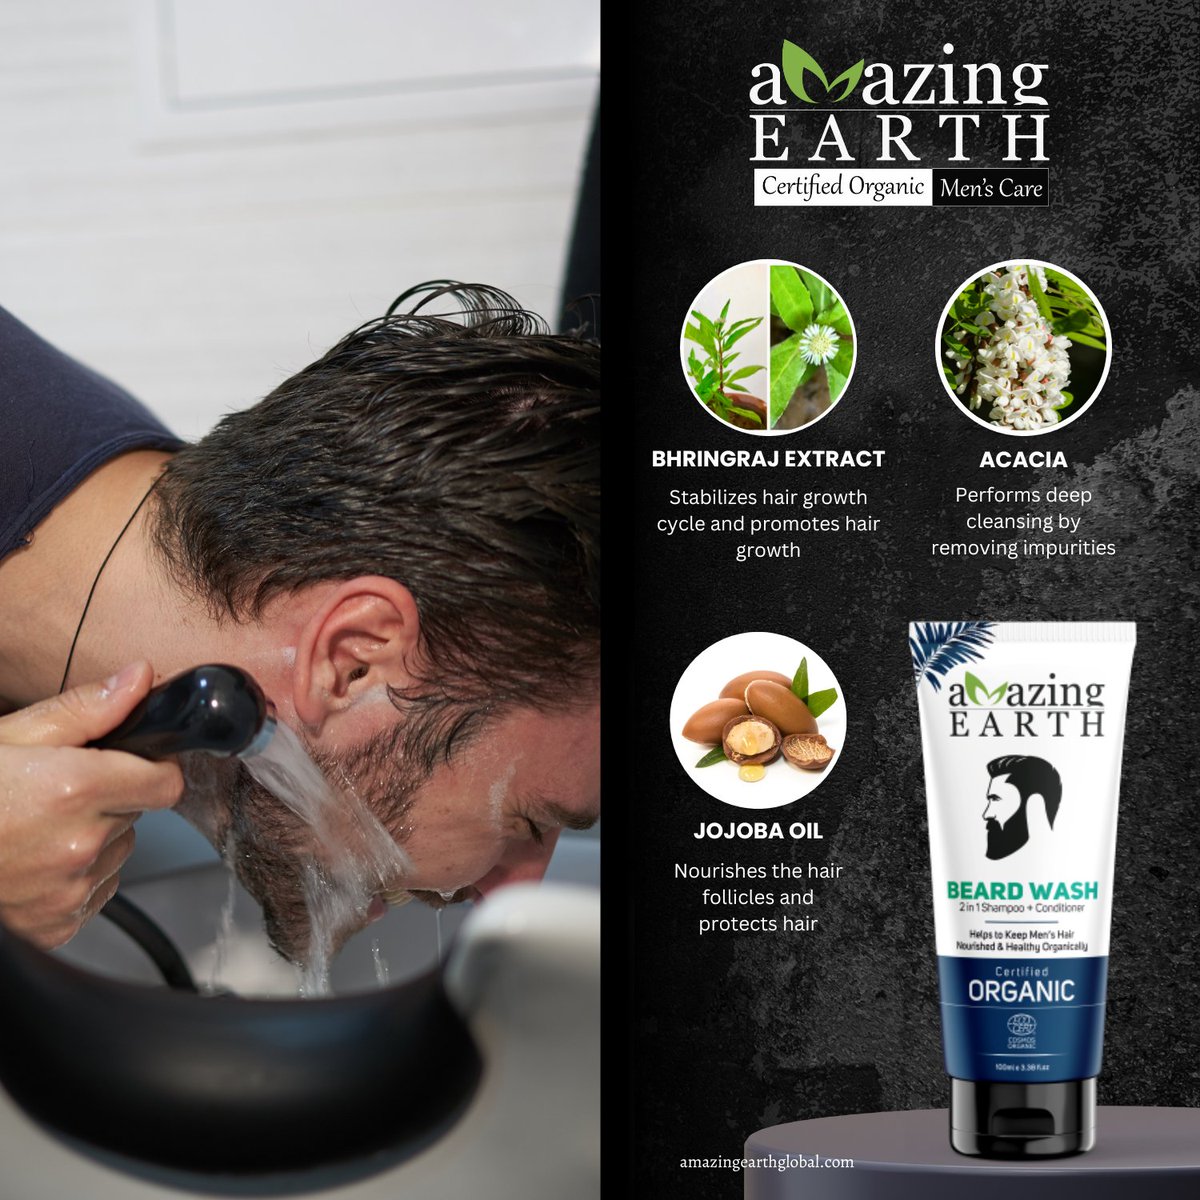 Beard feels like trash when you don't wash it properly.
That’s why you require AMAzing EARTH Beard Wash made of ECOCERT Greenlife-certified natural ingredients.
Buy Now - bit.ly/3ETl1qO
#AMAzingEARTH #beardlove #beard #beardwash #beardshampoo #beardconditioner #beardcare